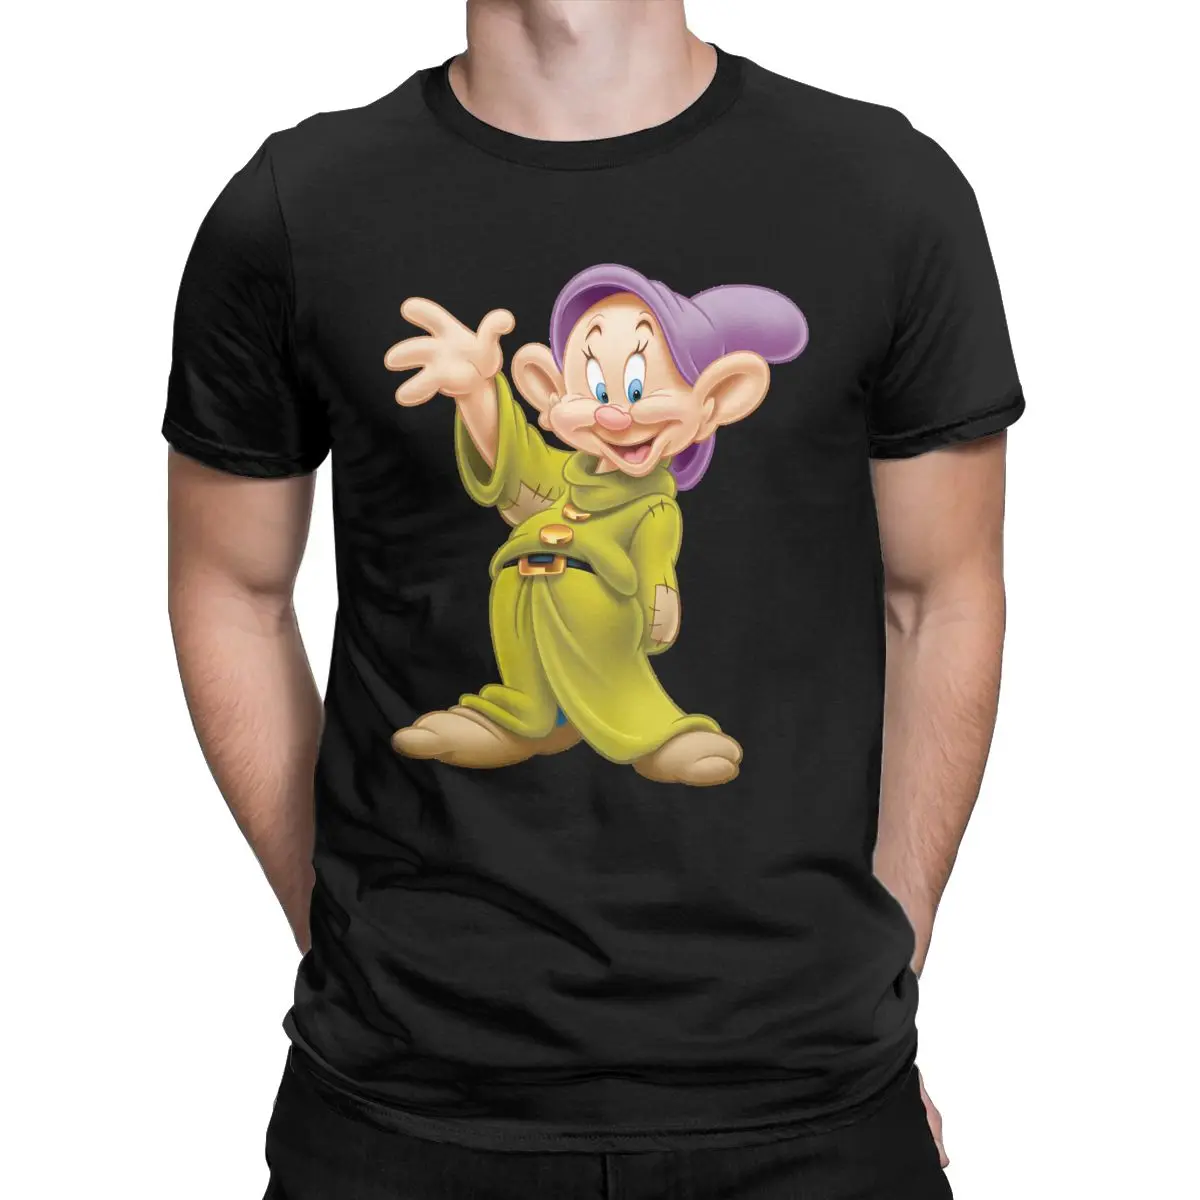 Snow White's Dopey T-Shirt for Men Disney Creative 100% Cotton Tees Round Collar Short Sleeve T Shirts Plus Size Clothing